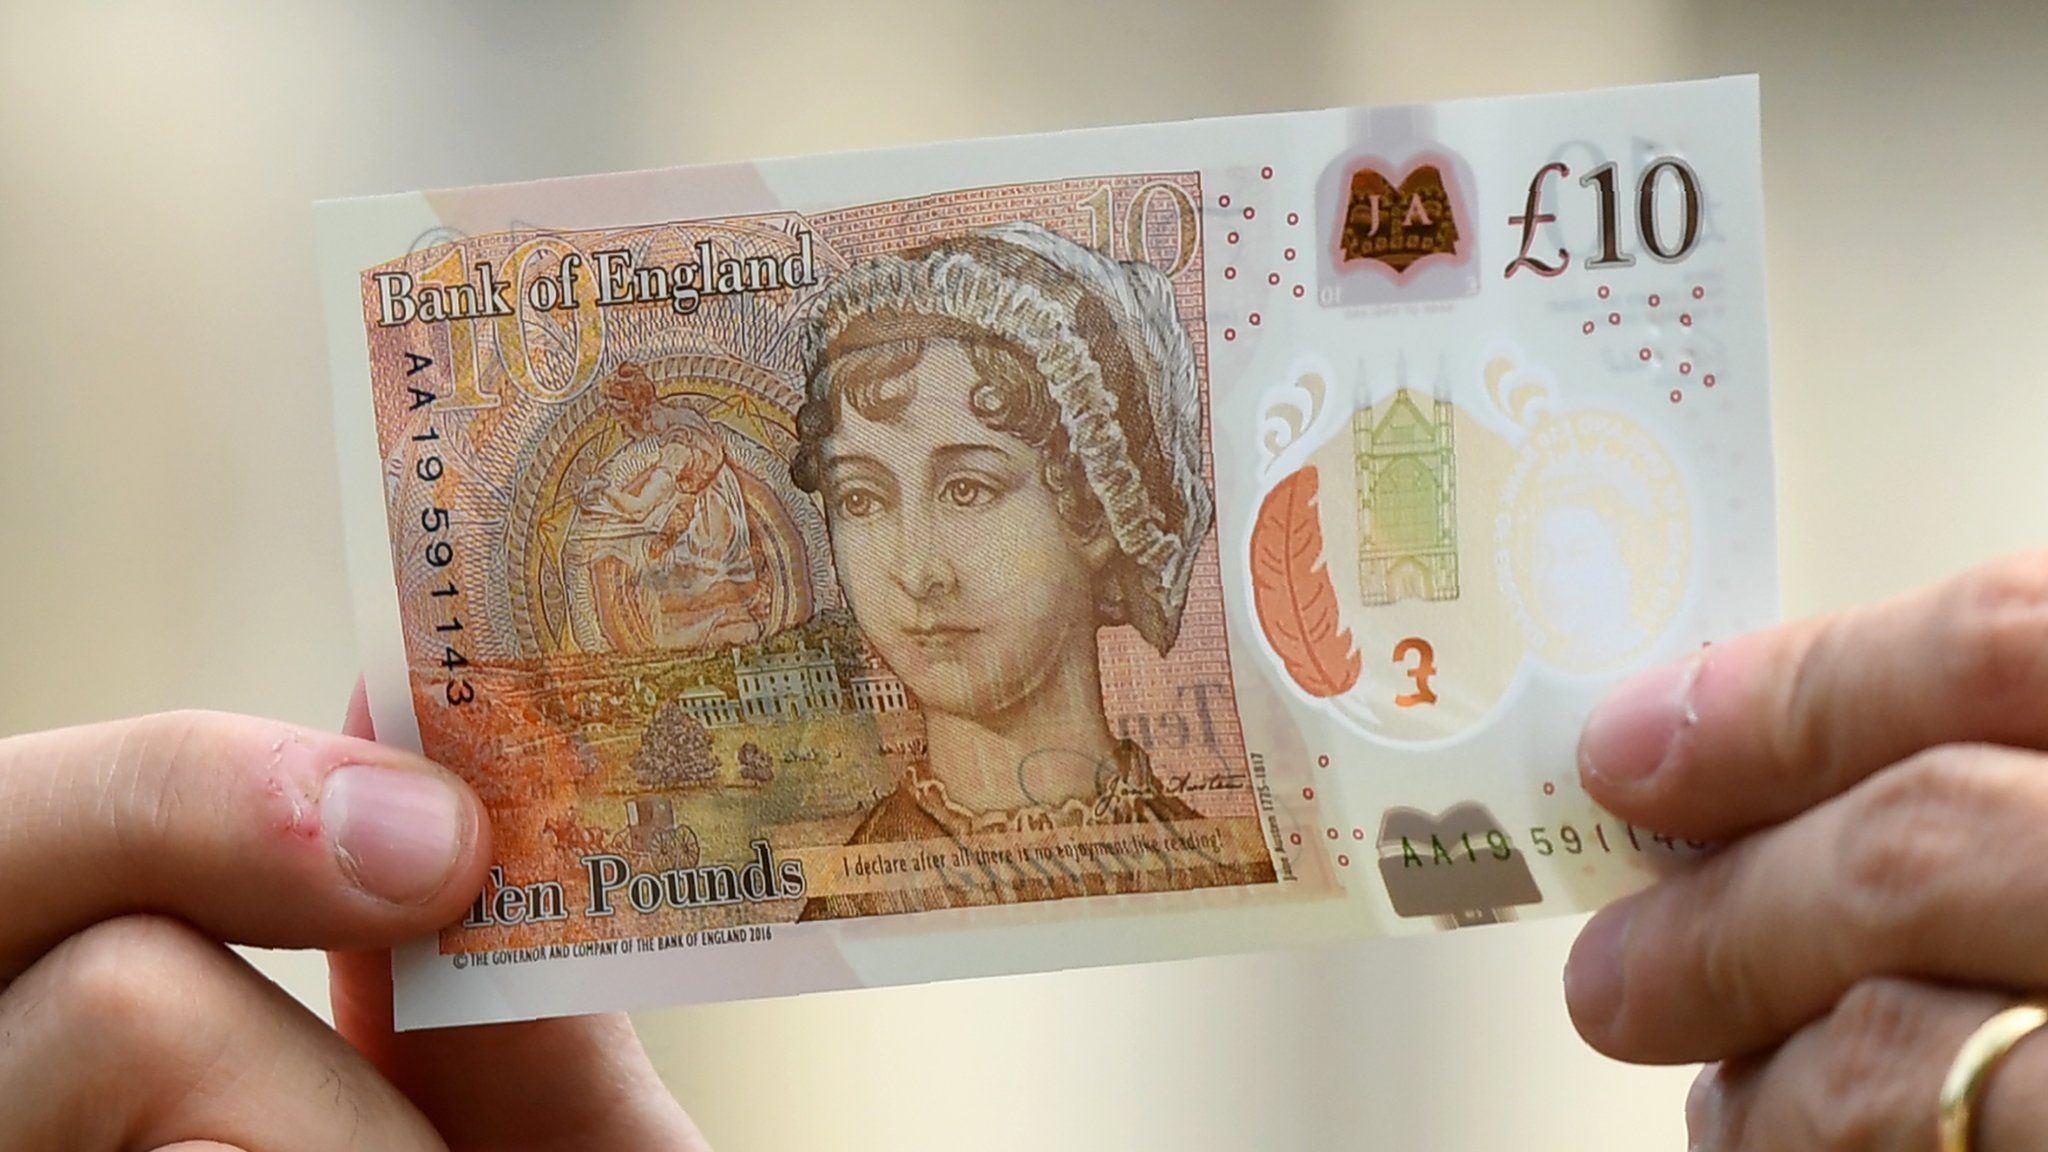 New £10 note